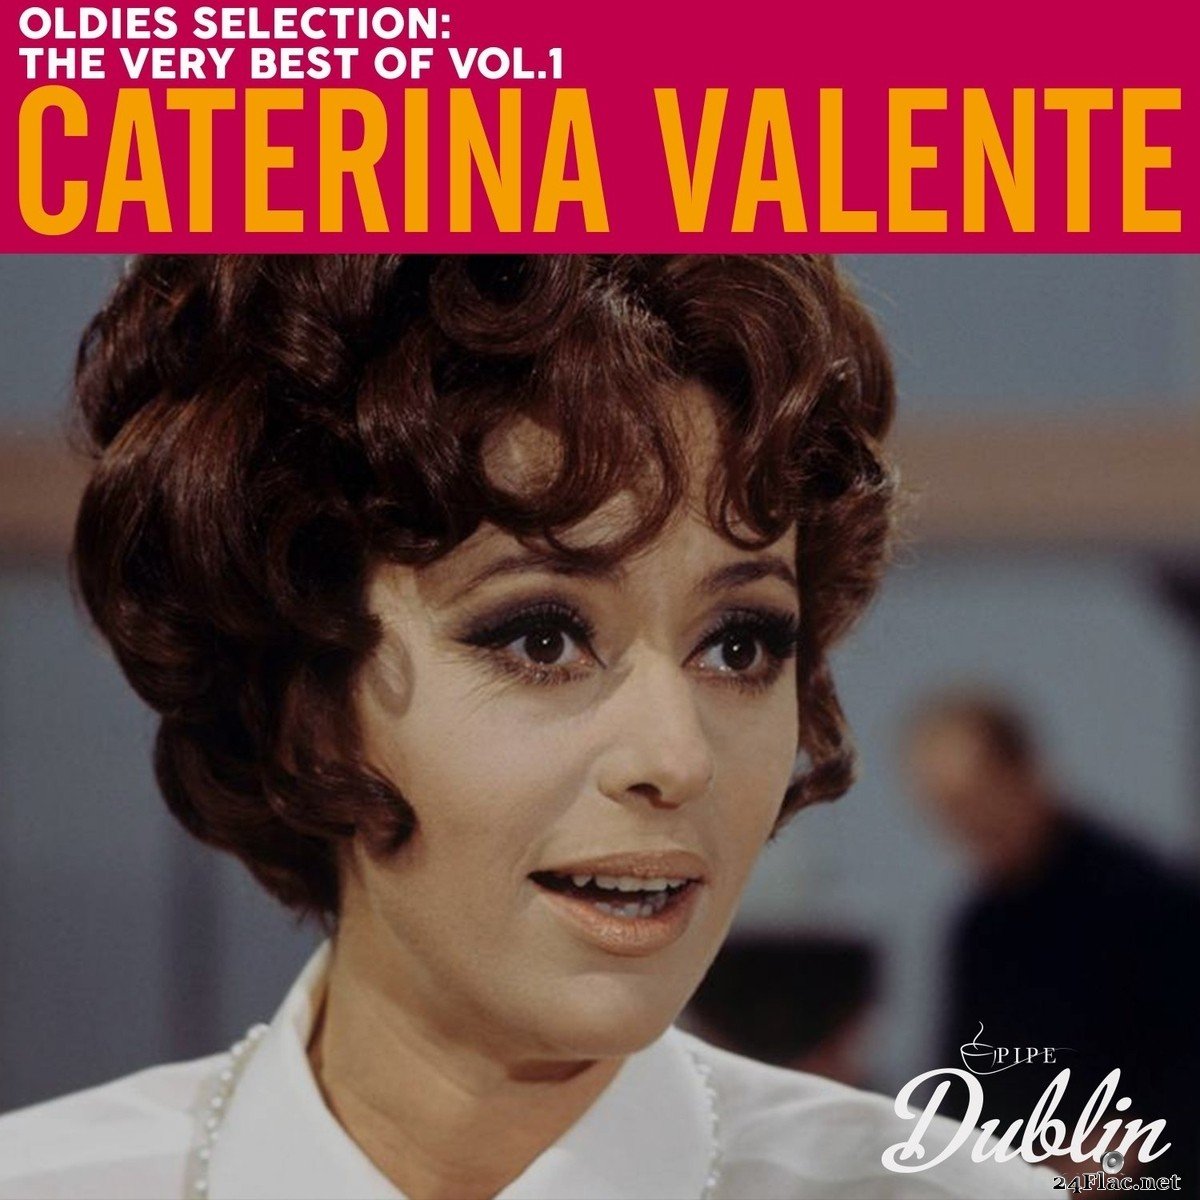 Caterina Valente - Oldies Selection: The Very Best of Vol.1 (2021) FLAC